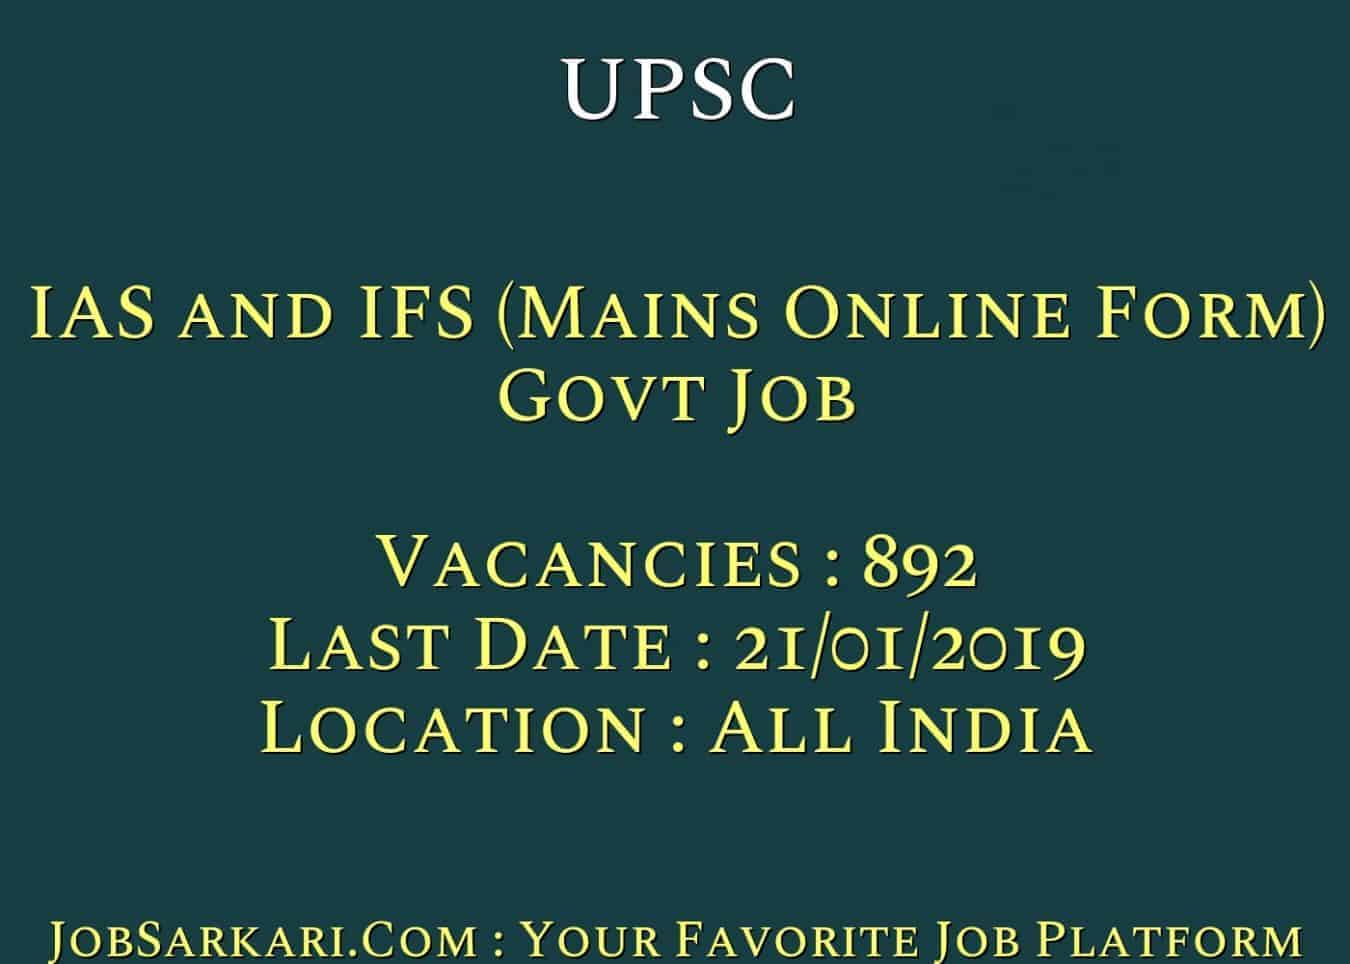 UPSC CIVIL Services Recruitment 2019 For 892 IAS and IFS Posts (Mains Online Form)